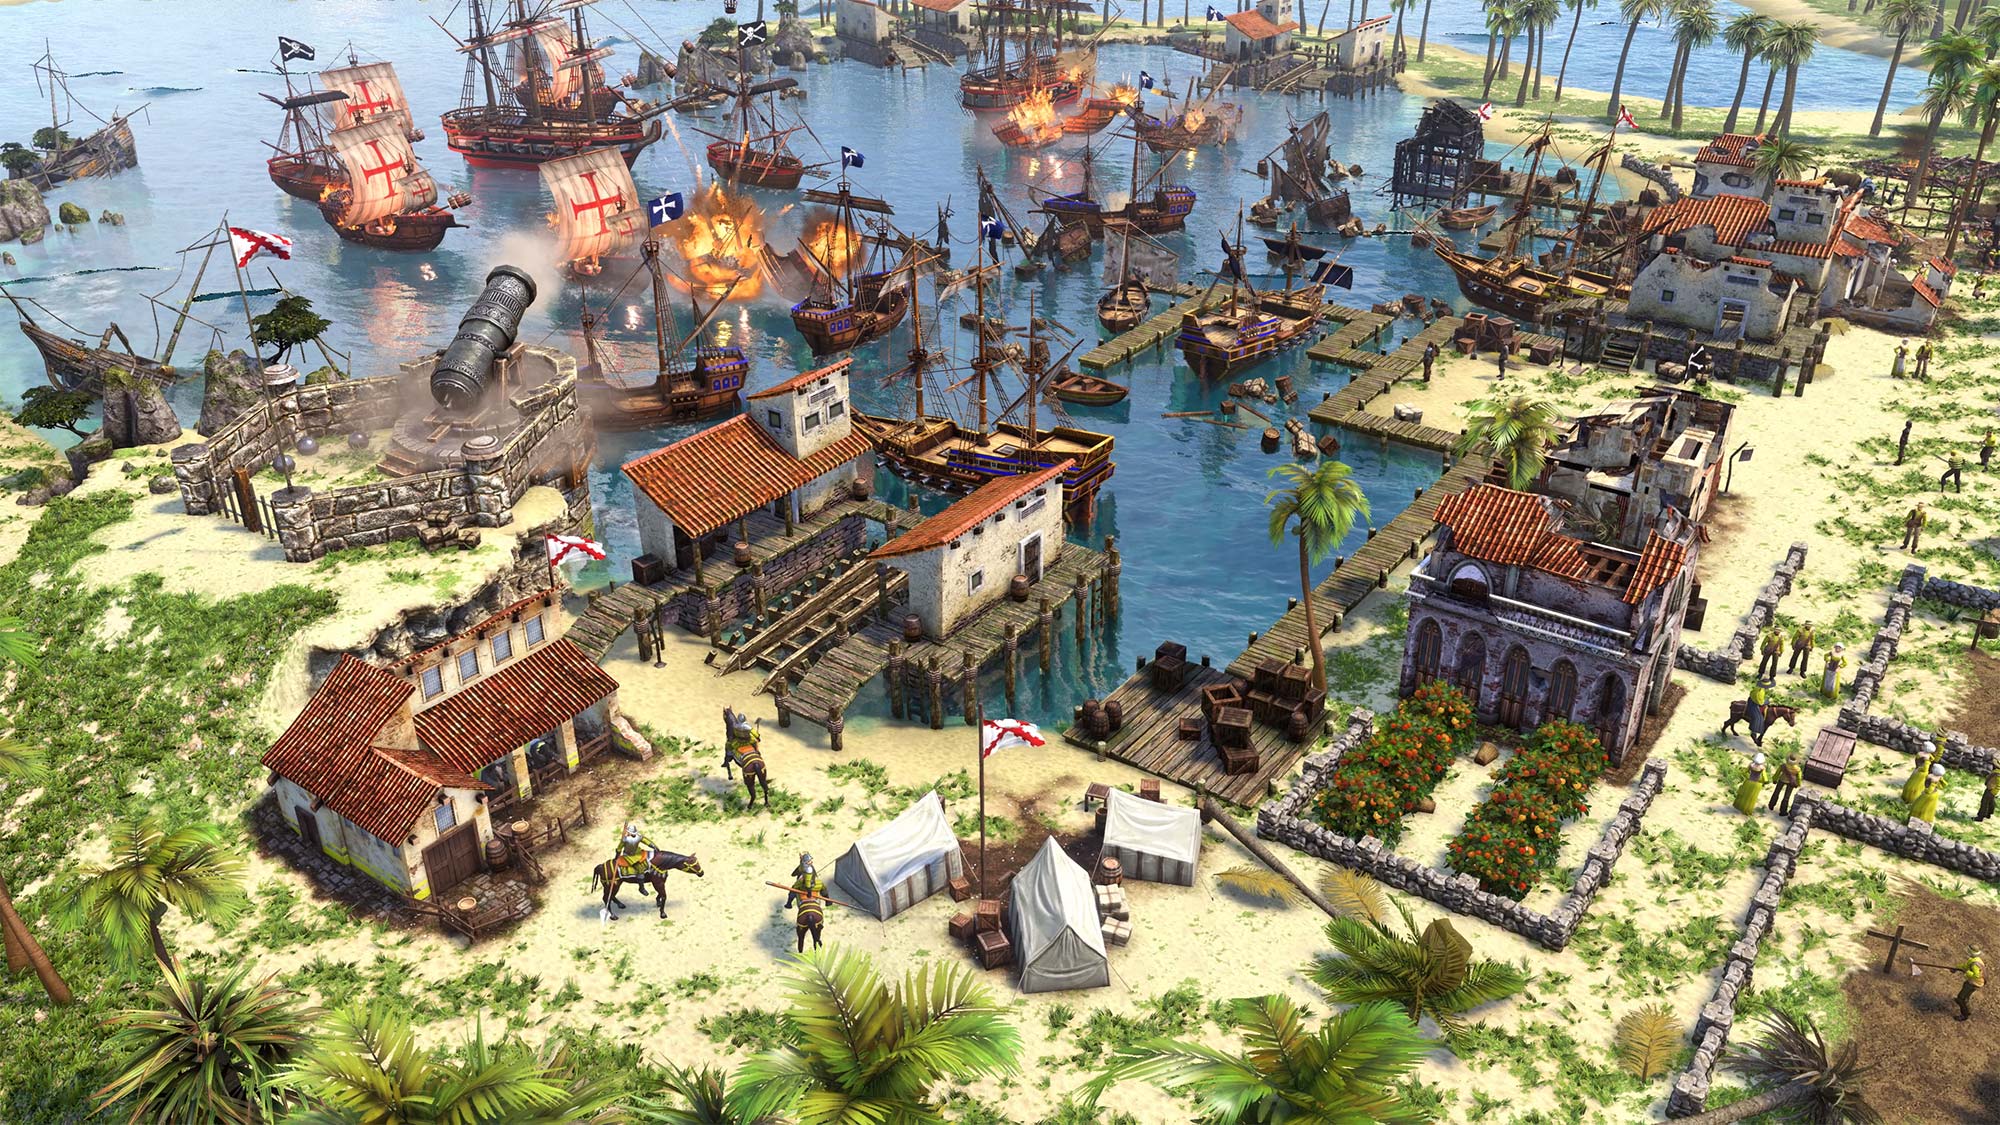 Age Of Empires Iii Definitive Edition Aims To Modernize The Overlooked Entry In The Iconic Rts Series